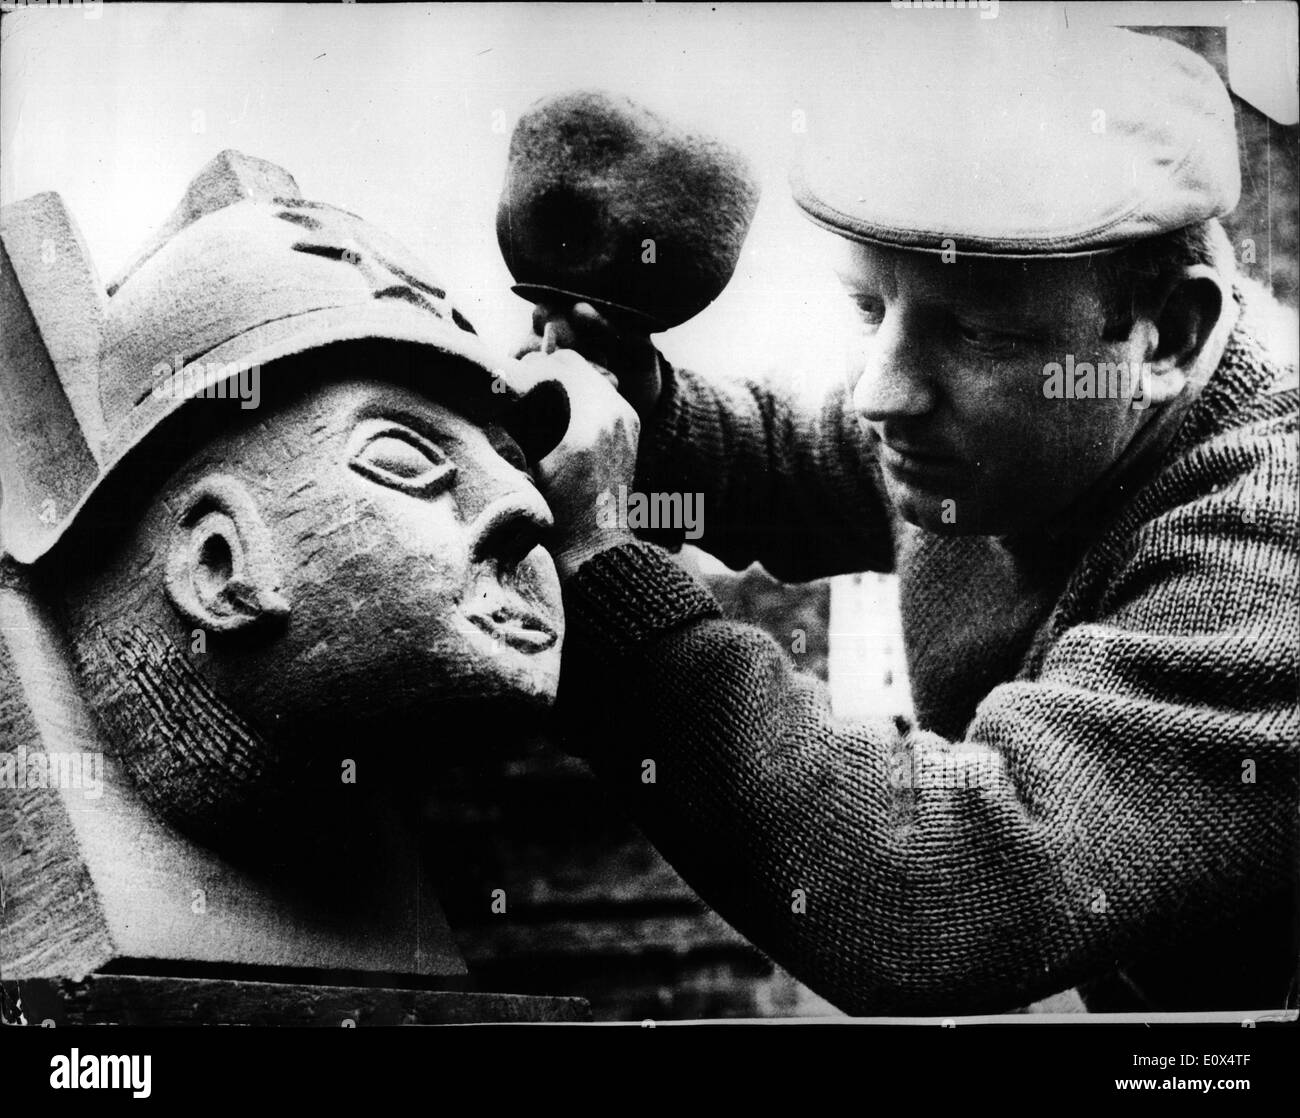 Apr. 04, 1965 - Bust of Police Hero for Carlisle Cathedral, A stone bust of police hero Constable George Russell, who - was shot dead at Oxenholme (Westmoreland) in February being made at Carlisle Cathedral, was completed yesterady. The bust is to get a piece of honour among ancient kings and bishops at the Cathedral, where Constable Russell, 35, was given a civic funeral. It is being hewn out of red sandstone by Ted Drinkwater (in picture), a foreman mason, and will be put in its place in the 12th. century cathedral. The tribute was the idea of the cathedral architect, Mr Stock Photo